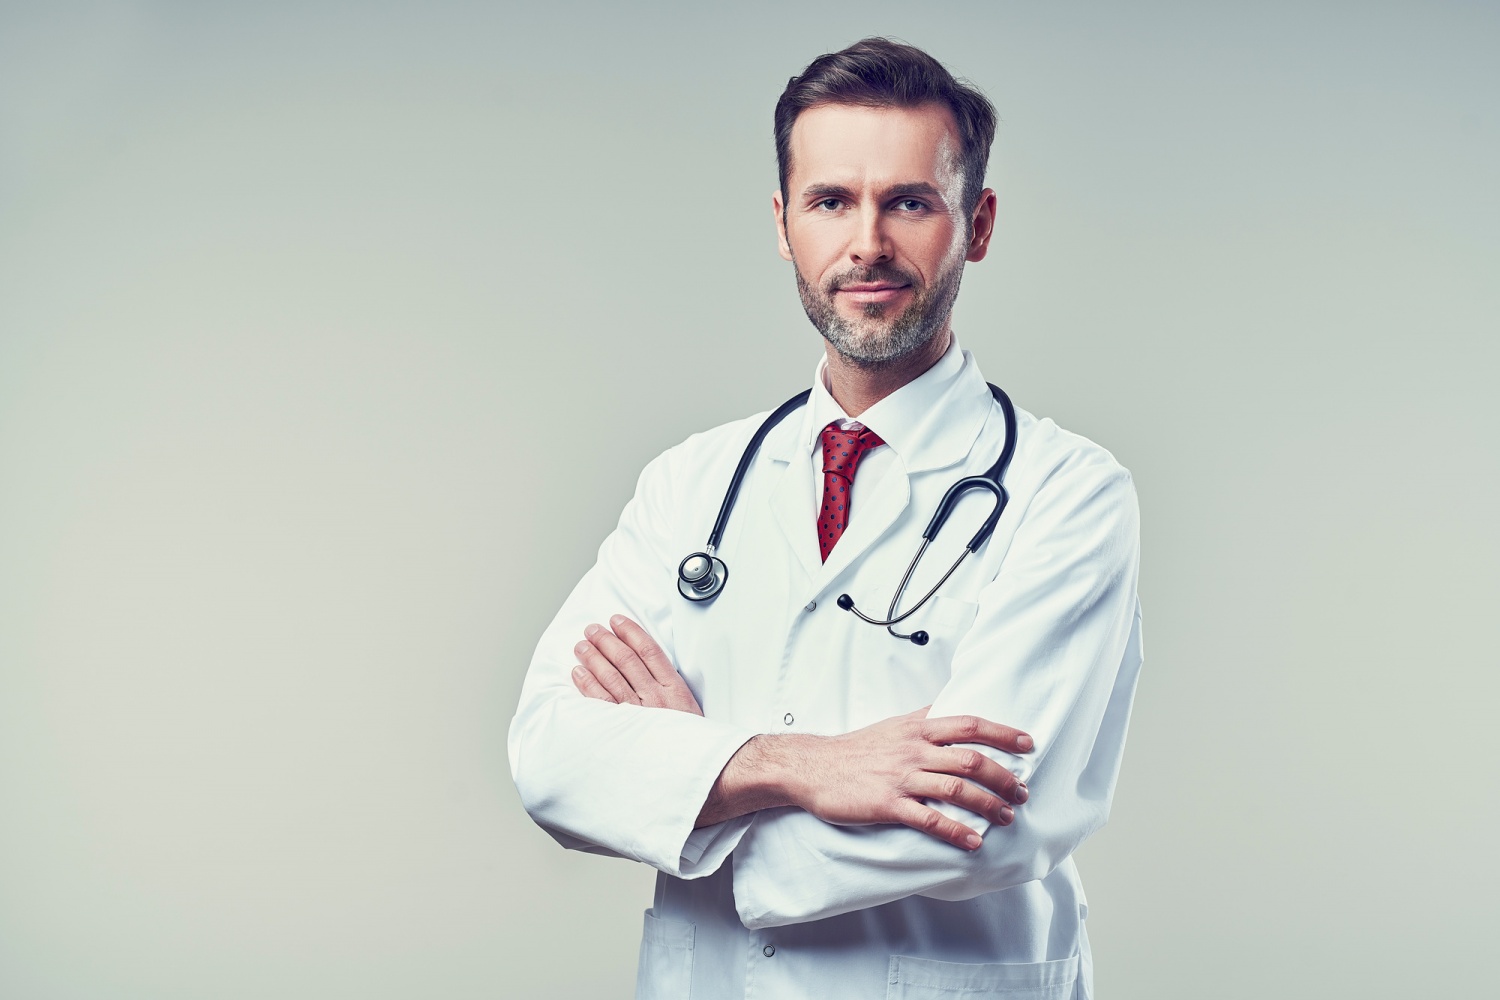 Why Is Credentialing Important in the Healthcare Field?